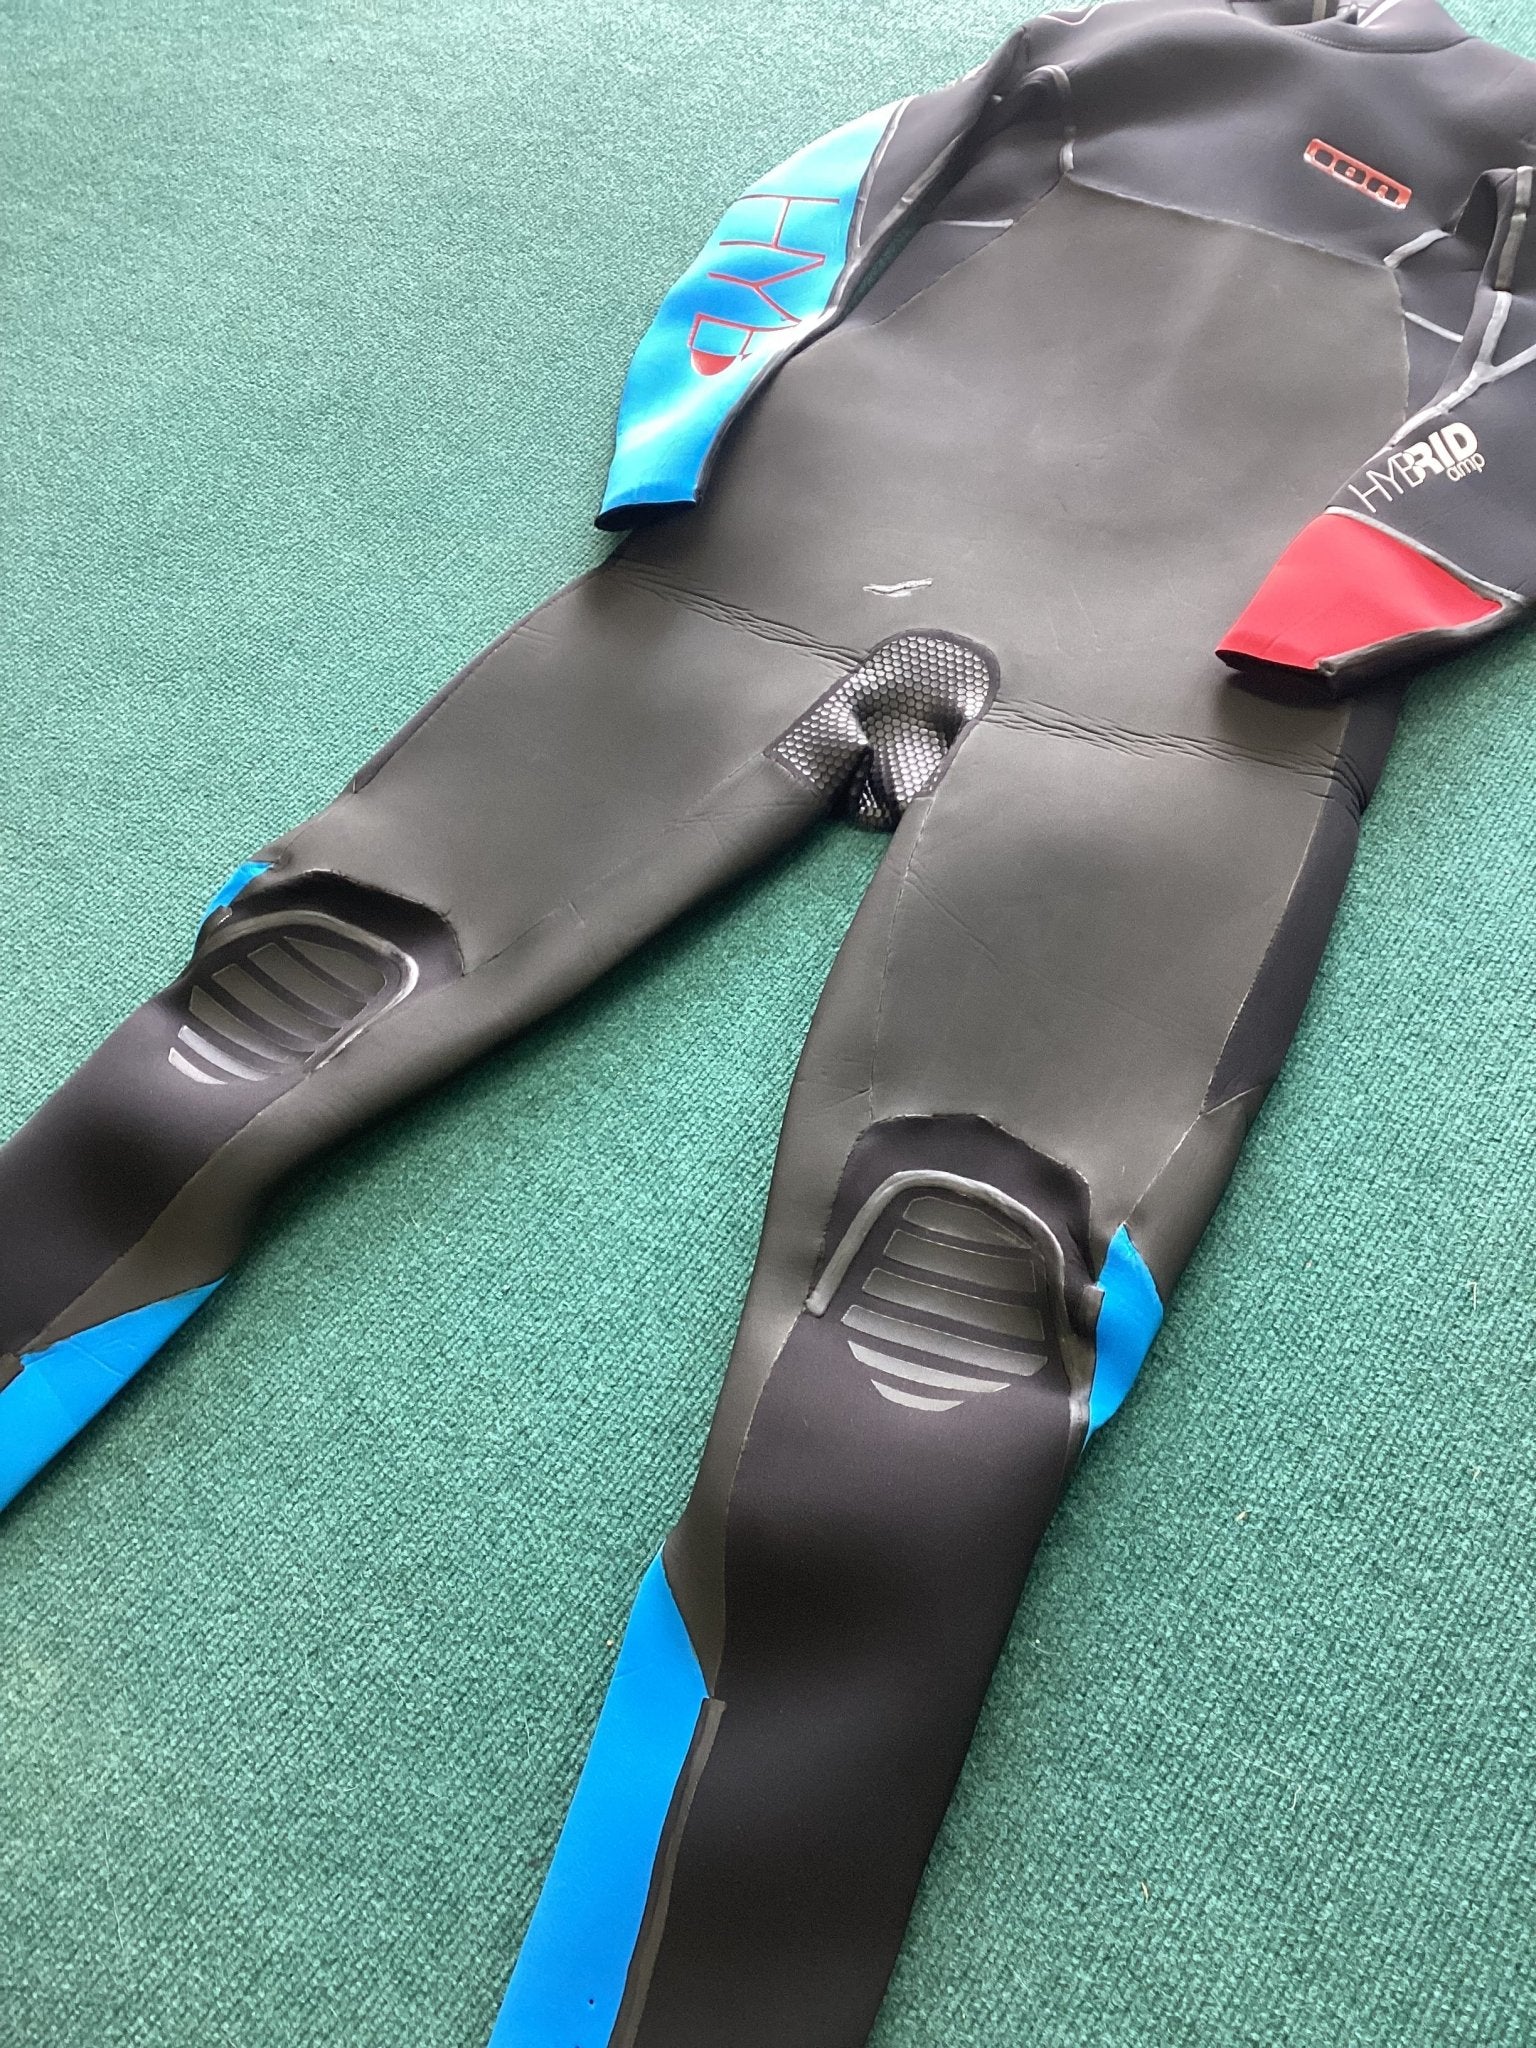 ION hybrid Amp Winter Wetsuit 5/4 size XL - Worthing Watersports - Wetsuits - ION Water